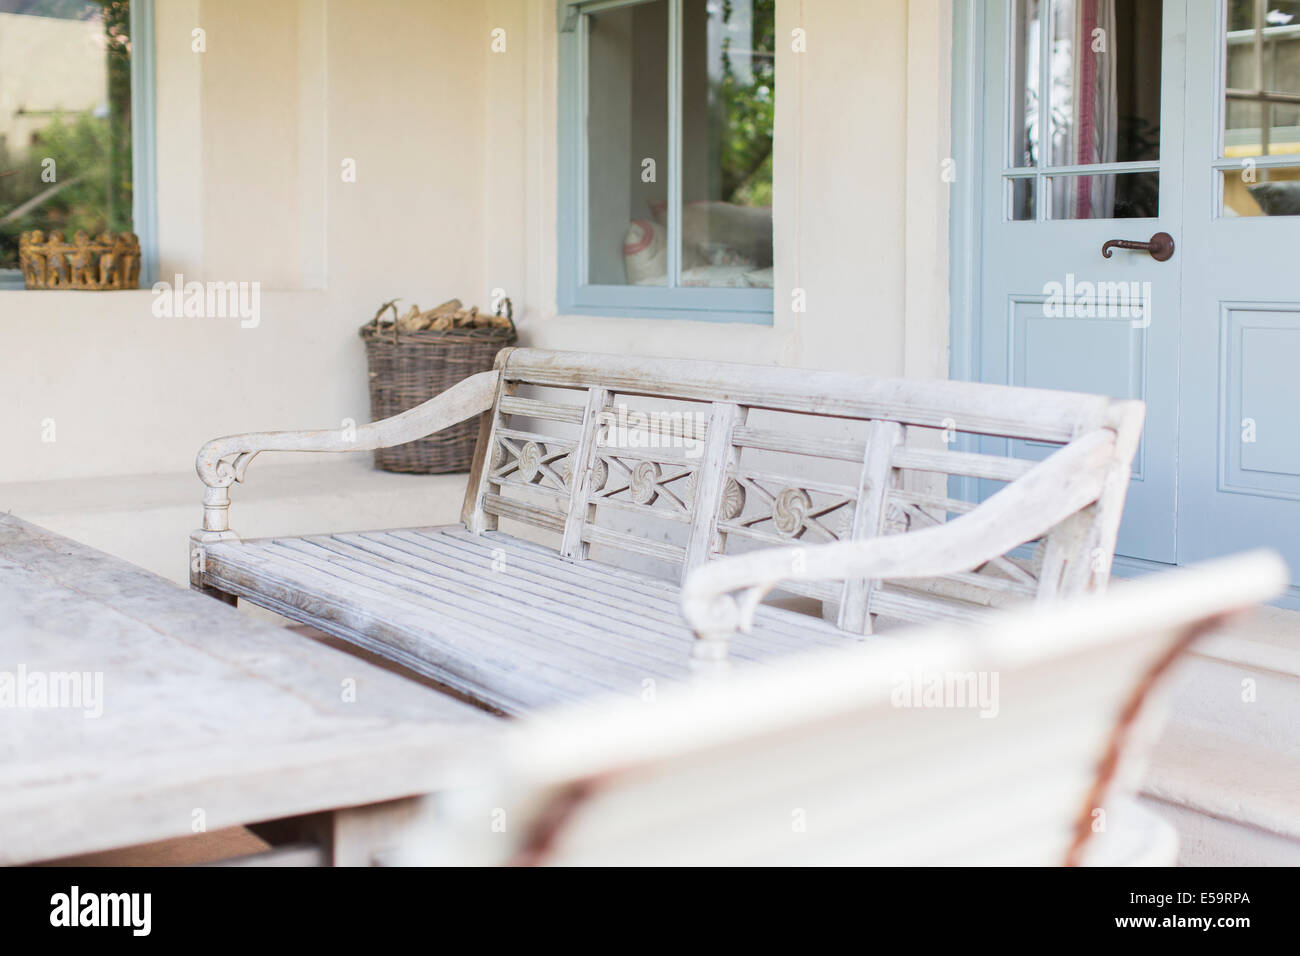 Bench and table in modern backyard Stock Photo